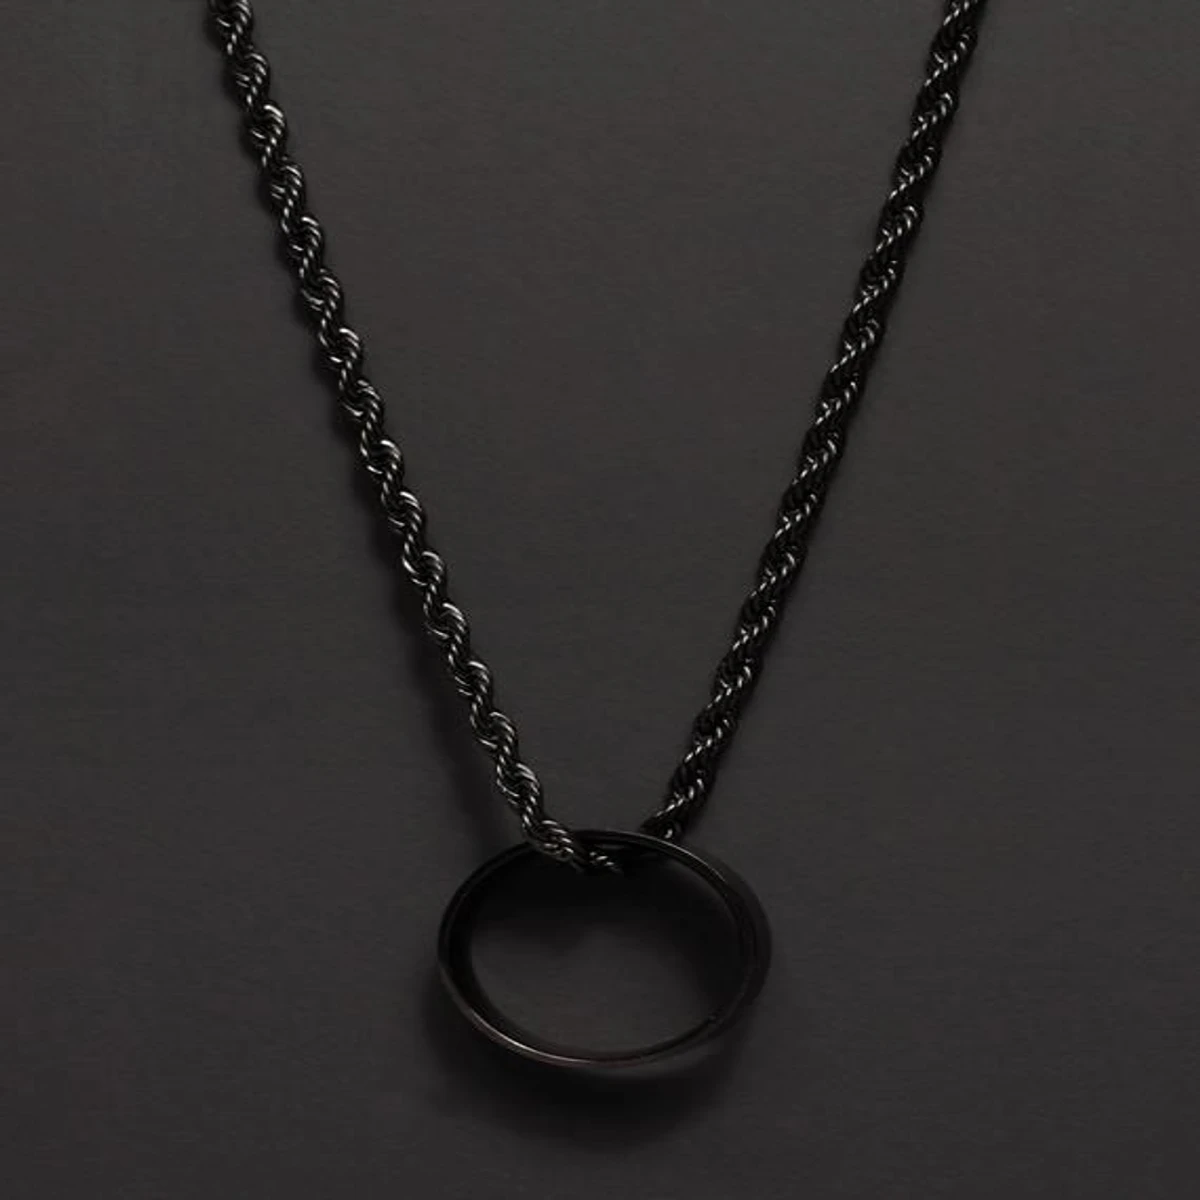 Rofe Chain With Black Ring Locket For Men